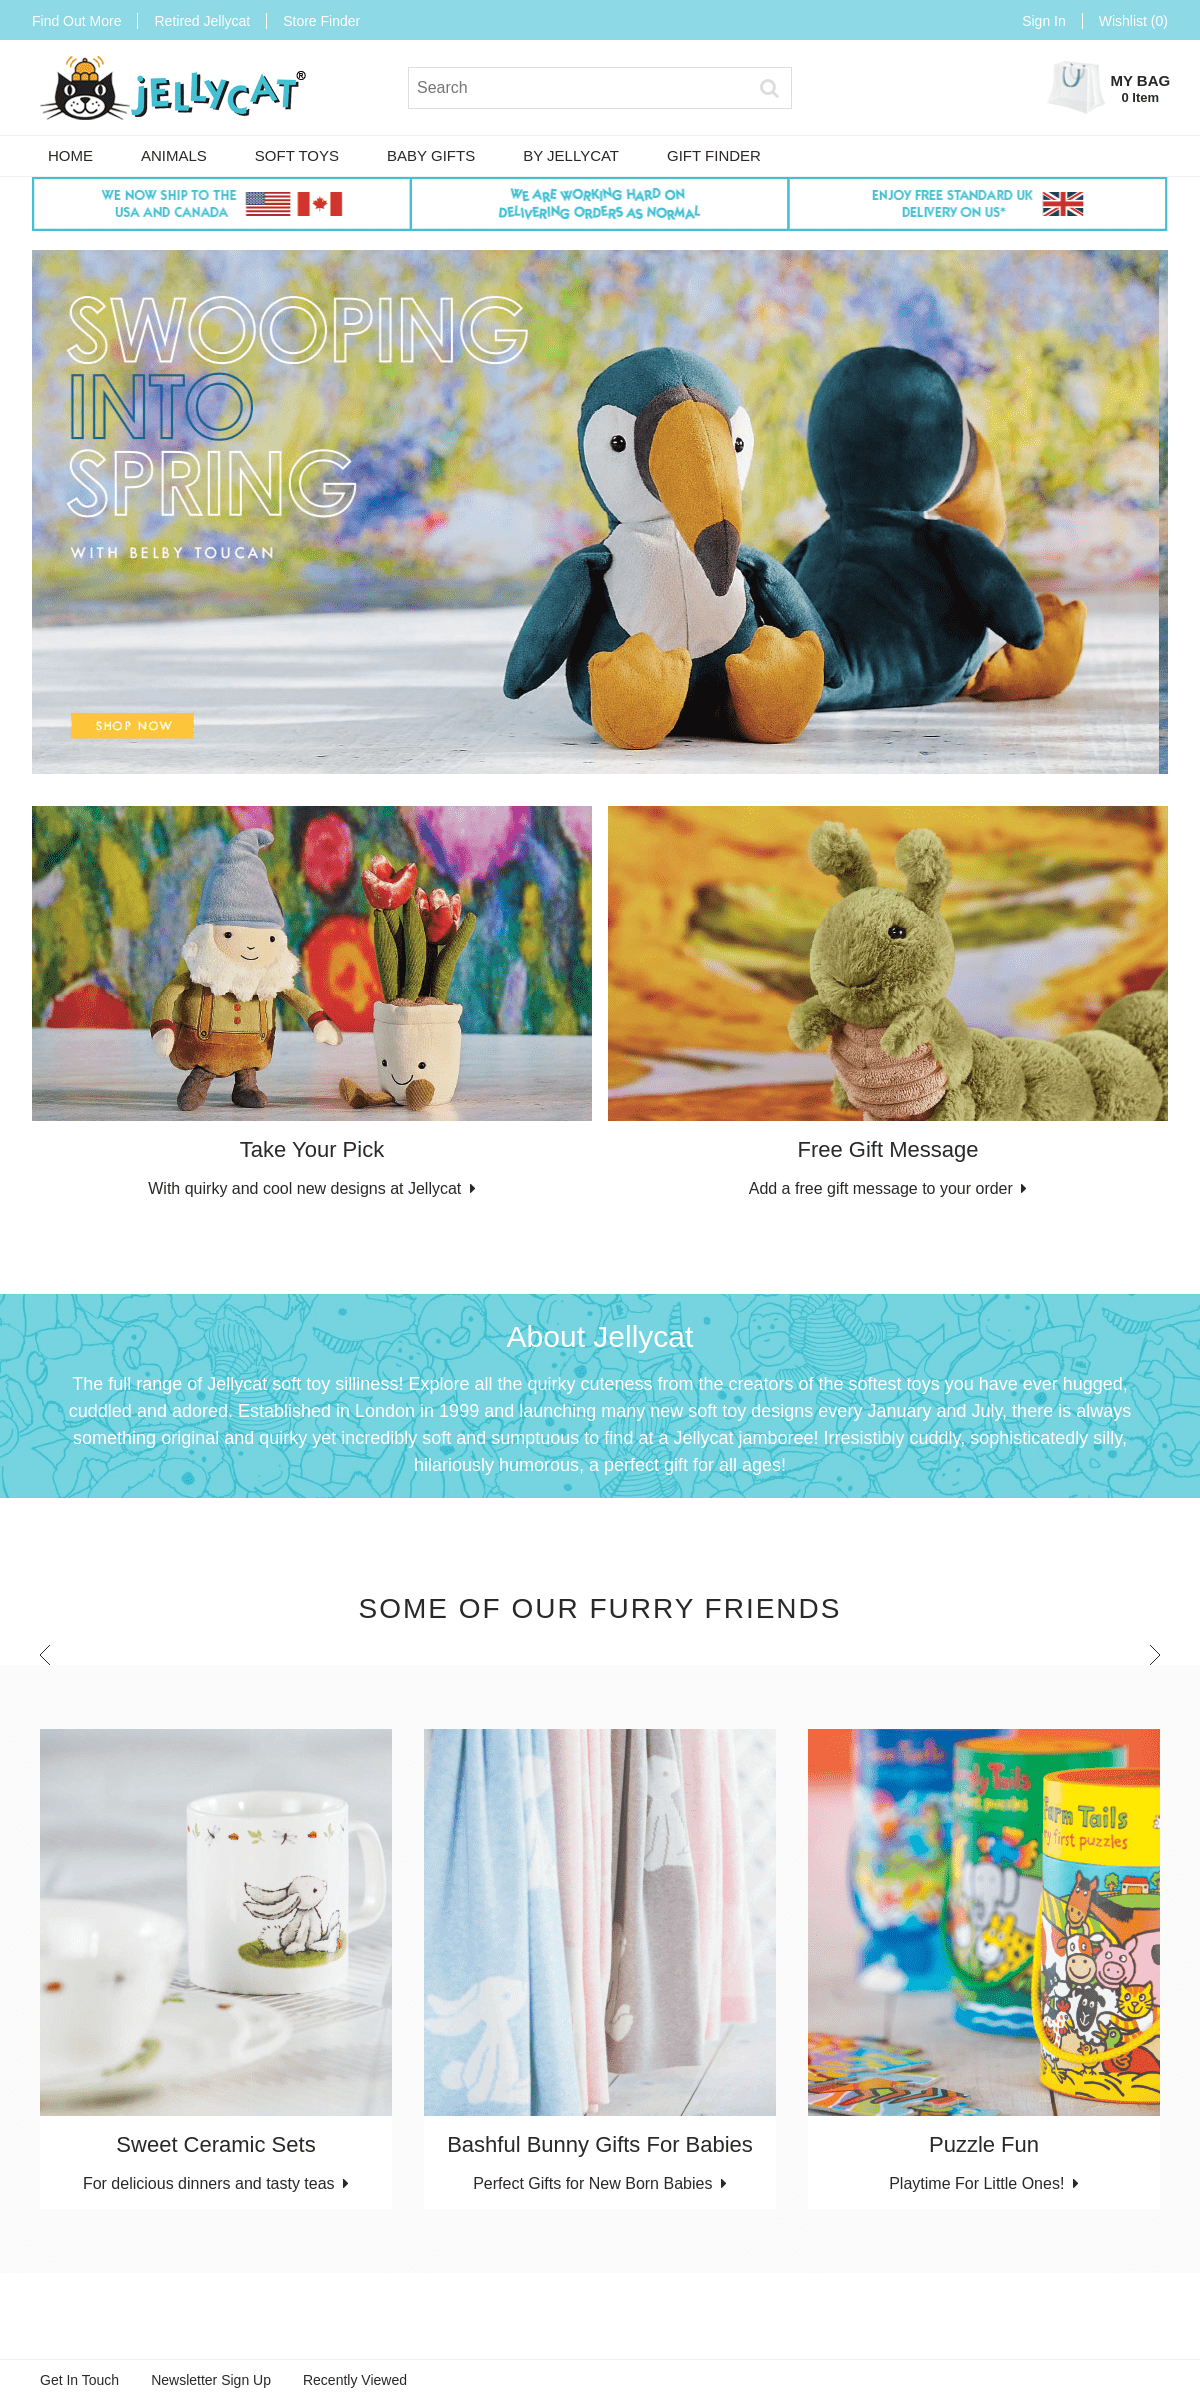 A complete backup of jellycat.com